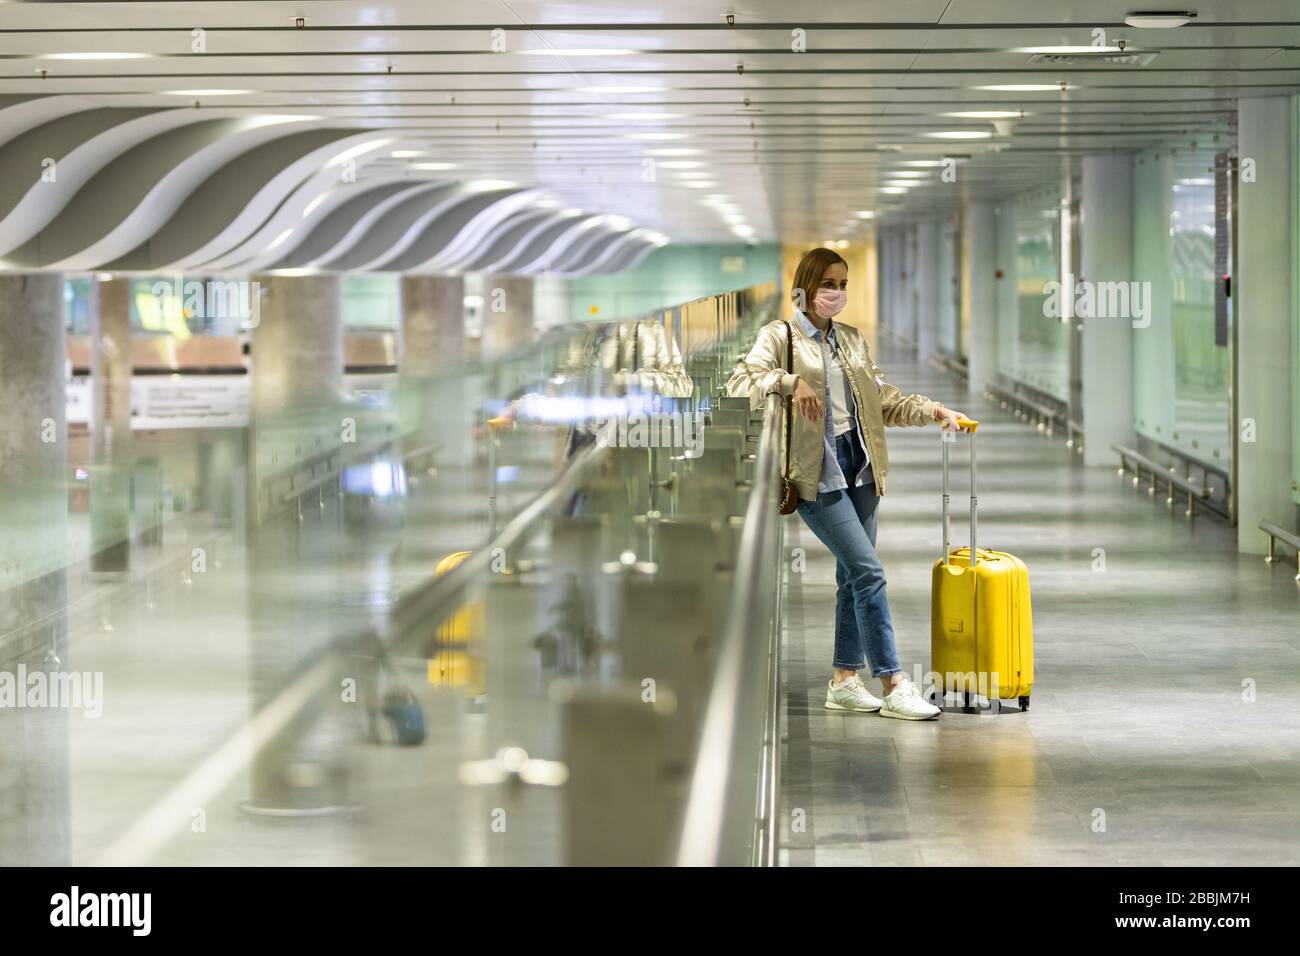 Woman with luggage stuck at empty airport terminal due to coronavirus pandemic/Covid-19 outbreak travel restrictions. Flight cancellation. Travel indu Stock Photo